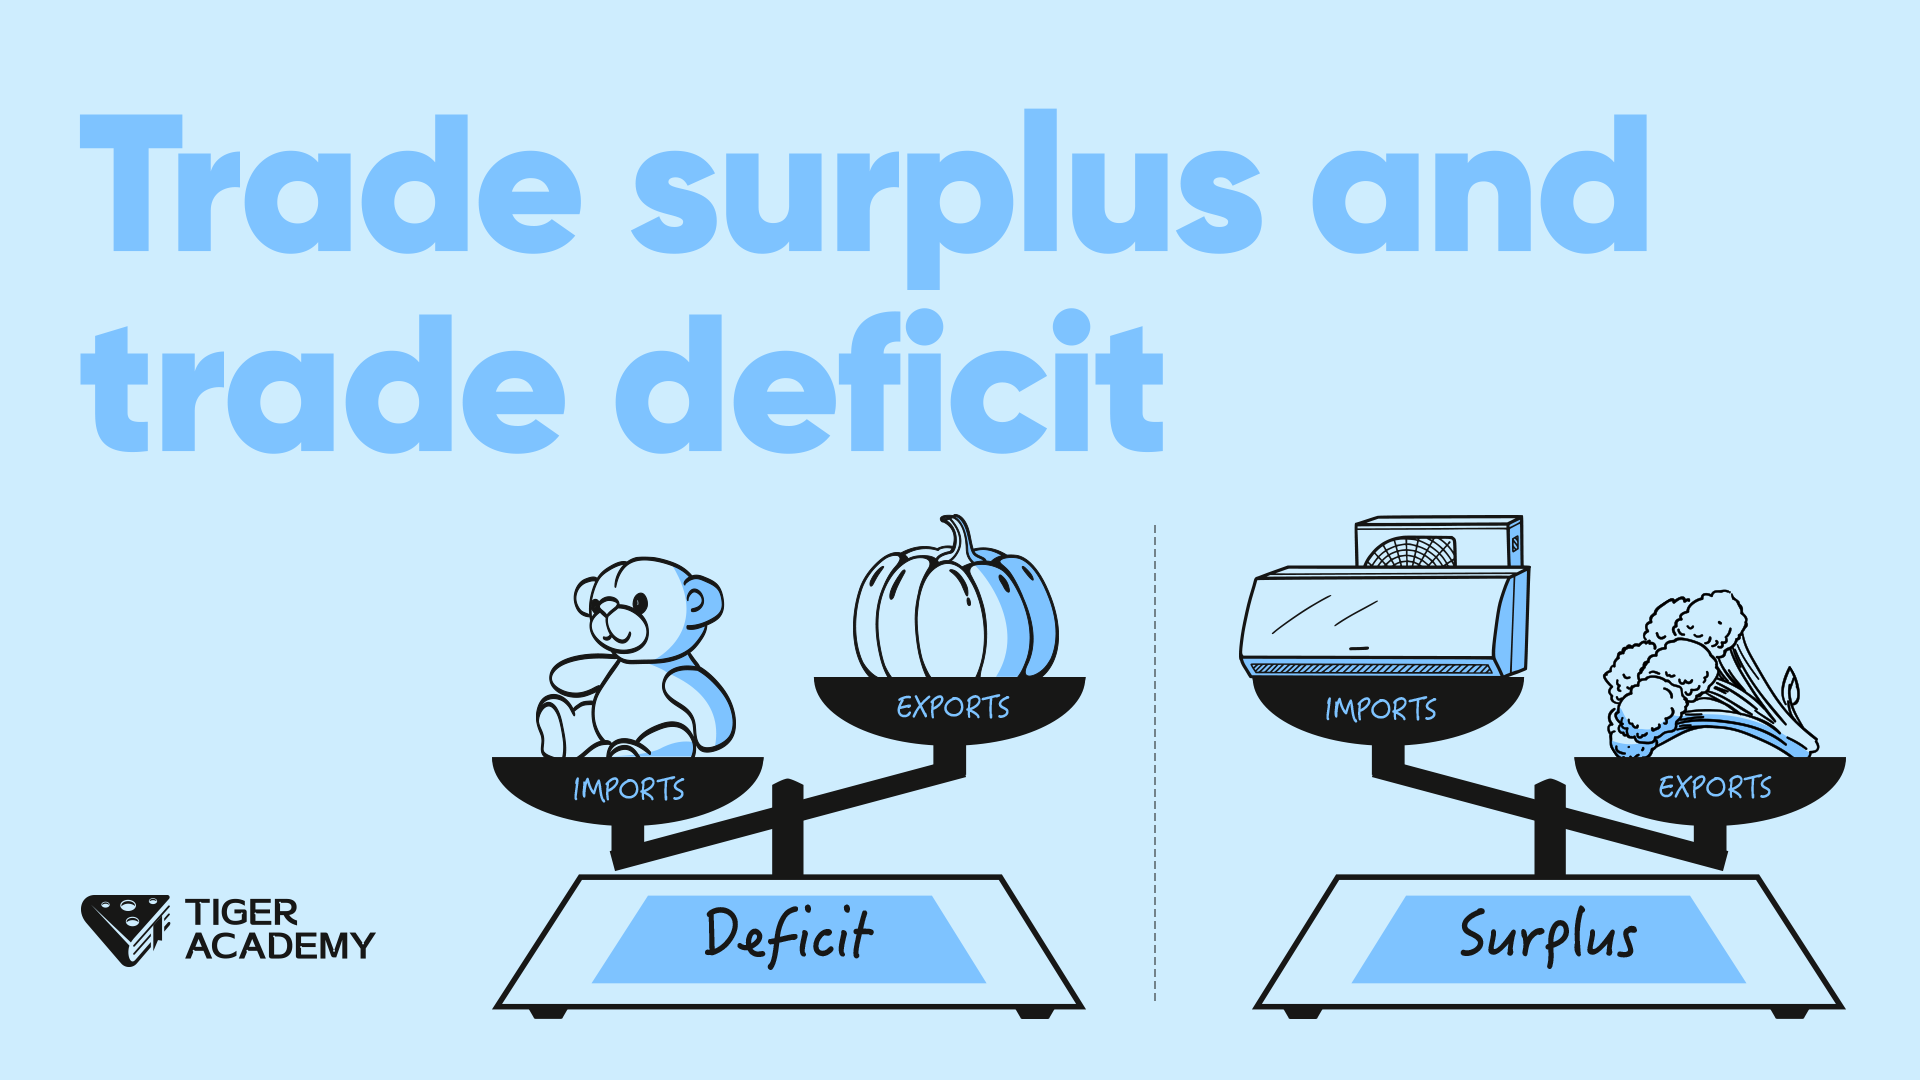 Day43. Trade surplus and trade deficit